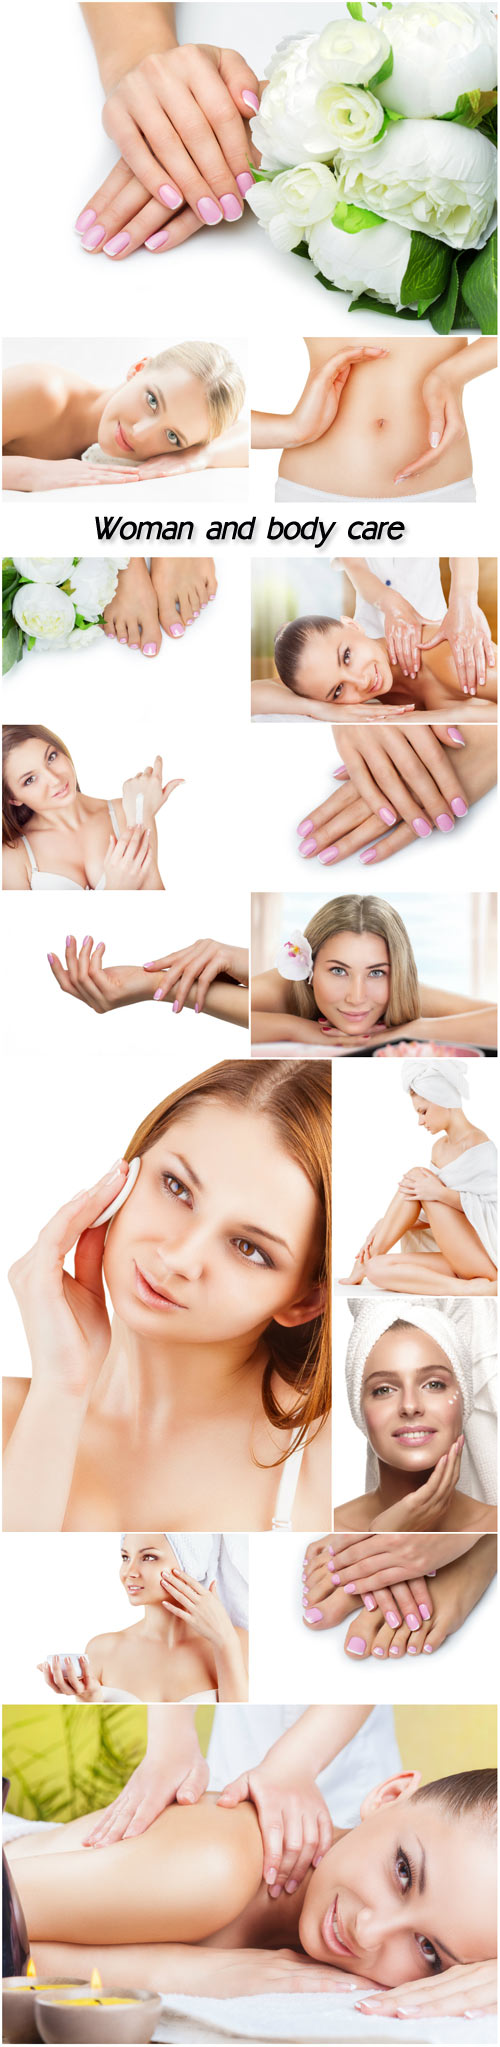 Spa treatments, a woman and body care